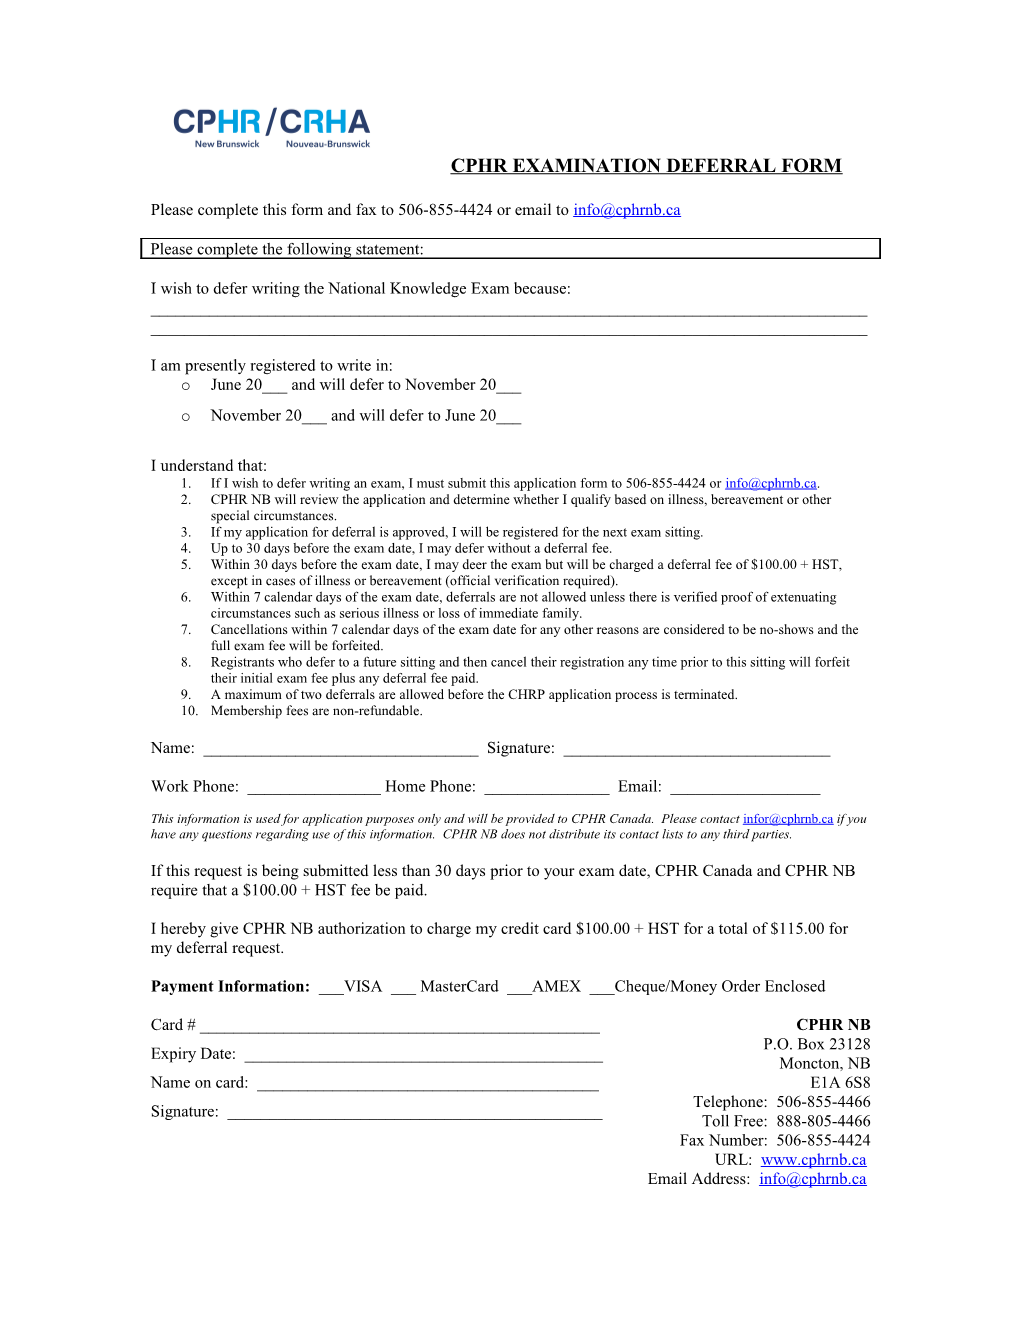 Please Complete This Form and Fax to 506-855-4424 Or Email To